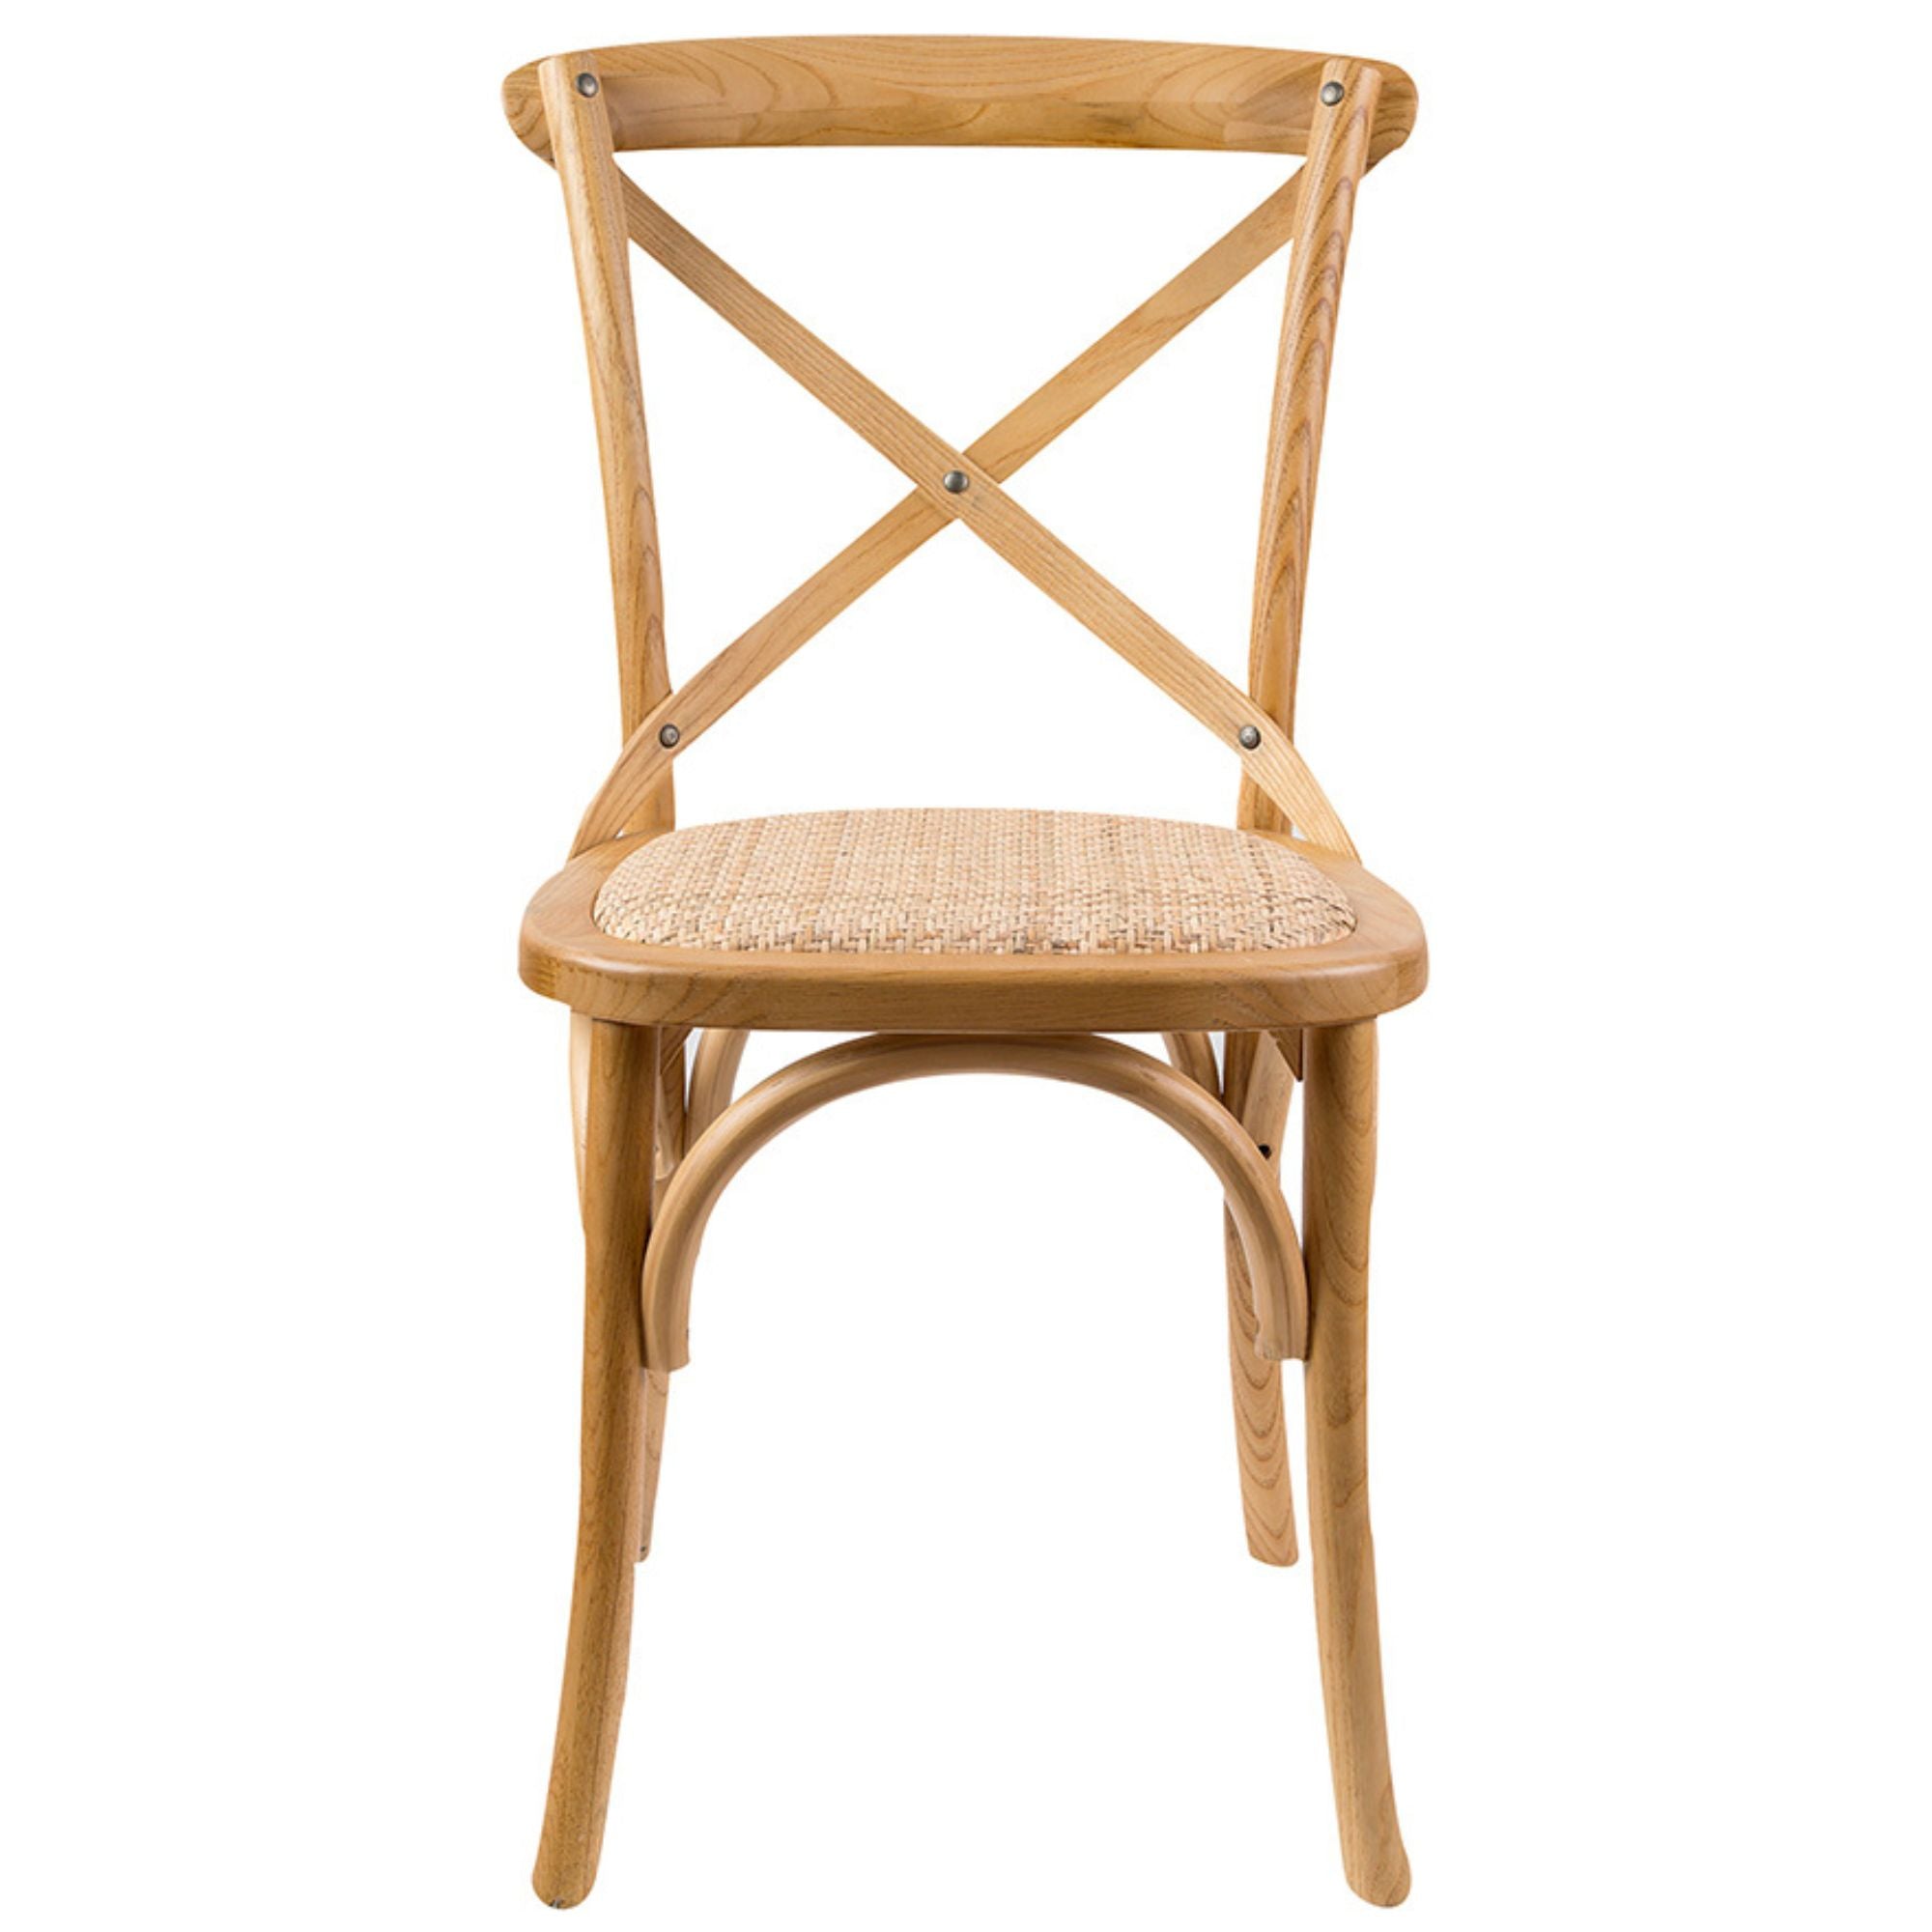 Aster Crossback Dining Chair Set of 2 Solid Birch Timber Wood Ratan Seat - Oak